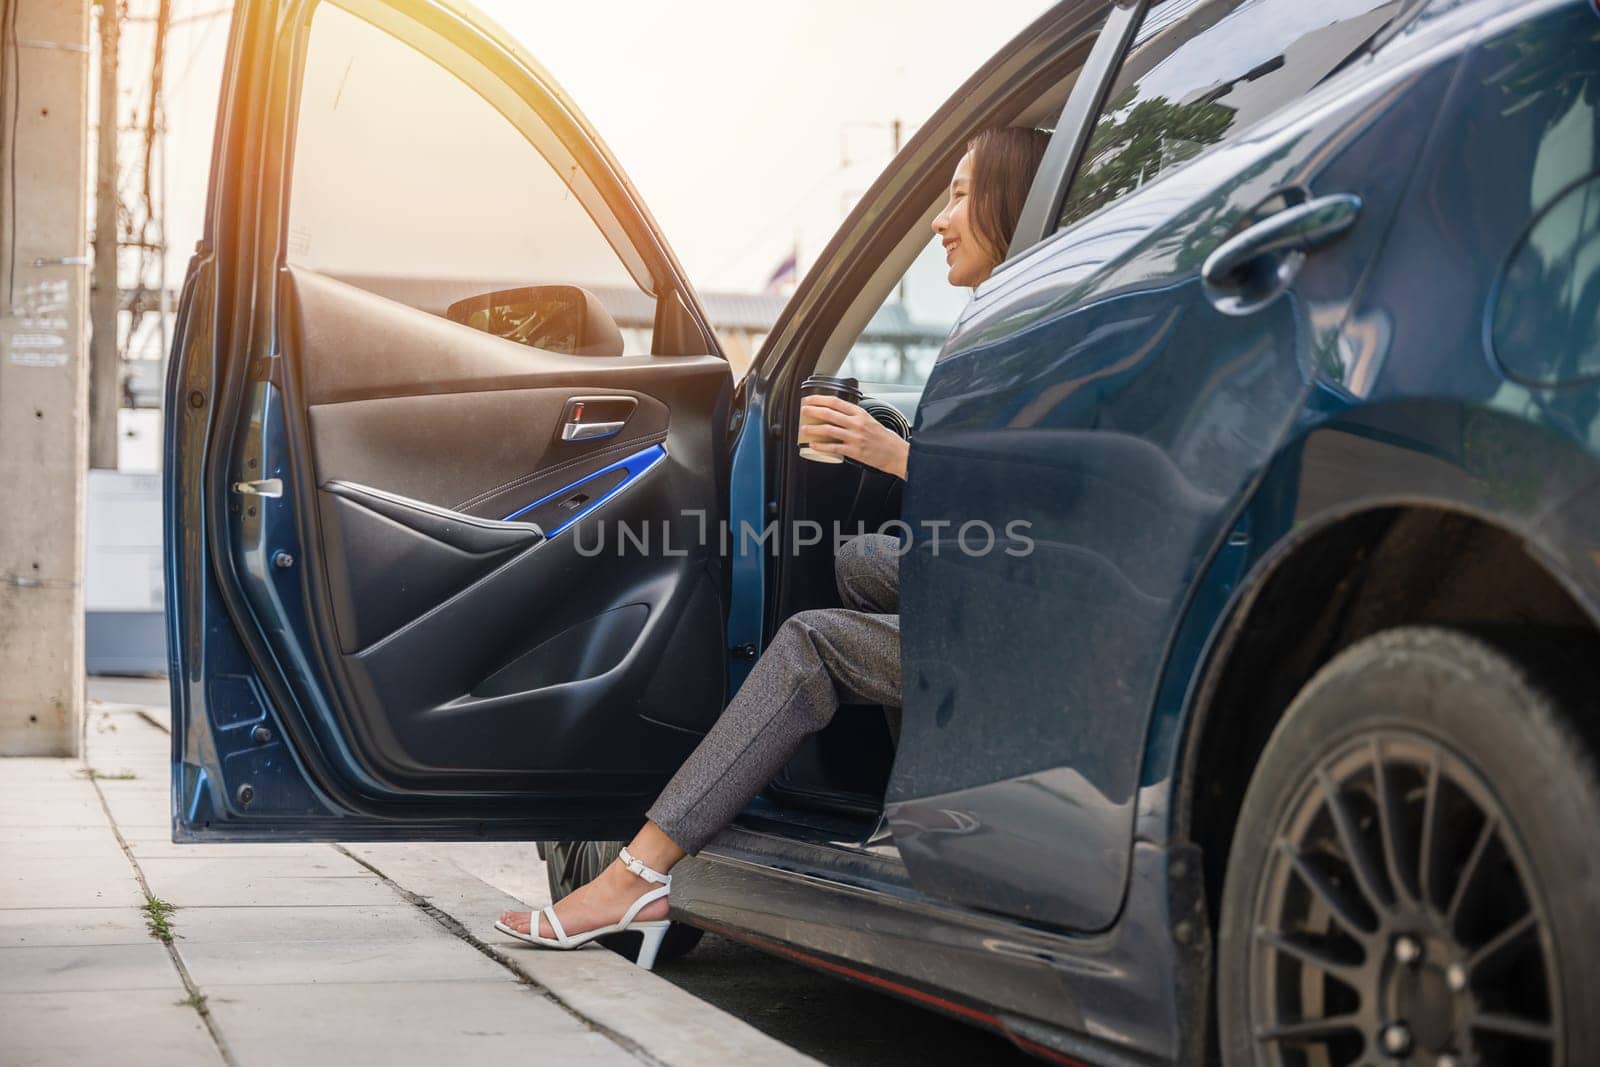 Businesswoman in sleek suit is sitting in modern car. Her long slim leg in high heel shoe opens door exuding elegance and sensuality. Getting out of luxury vehicle is symbol of her glamour and success